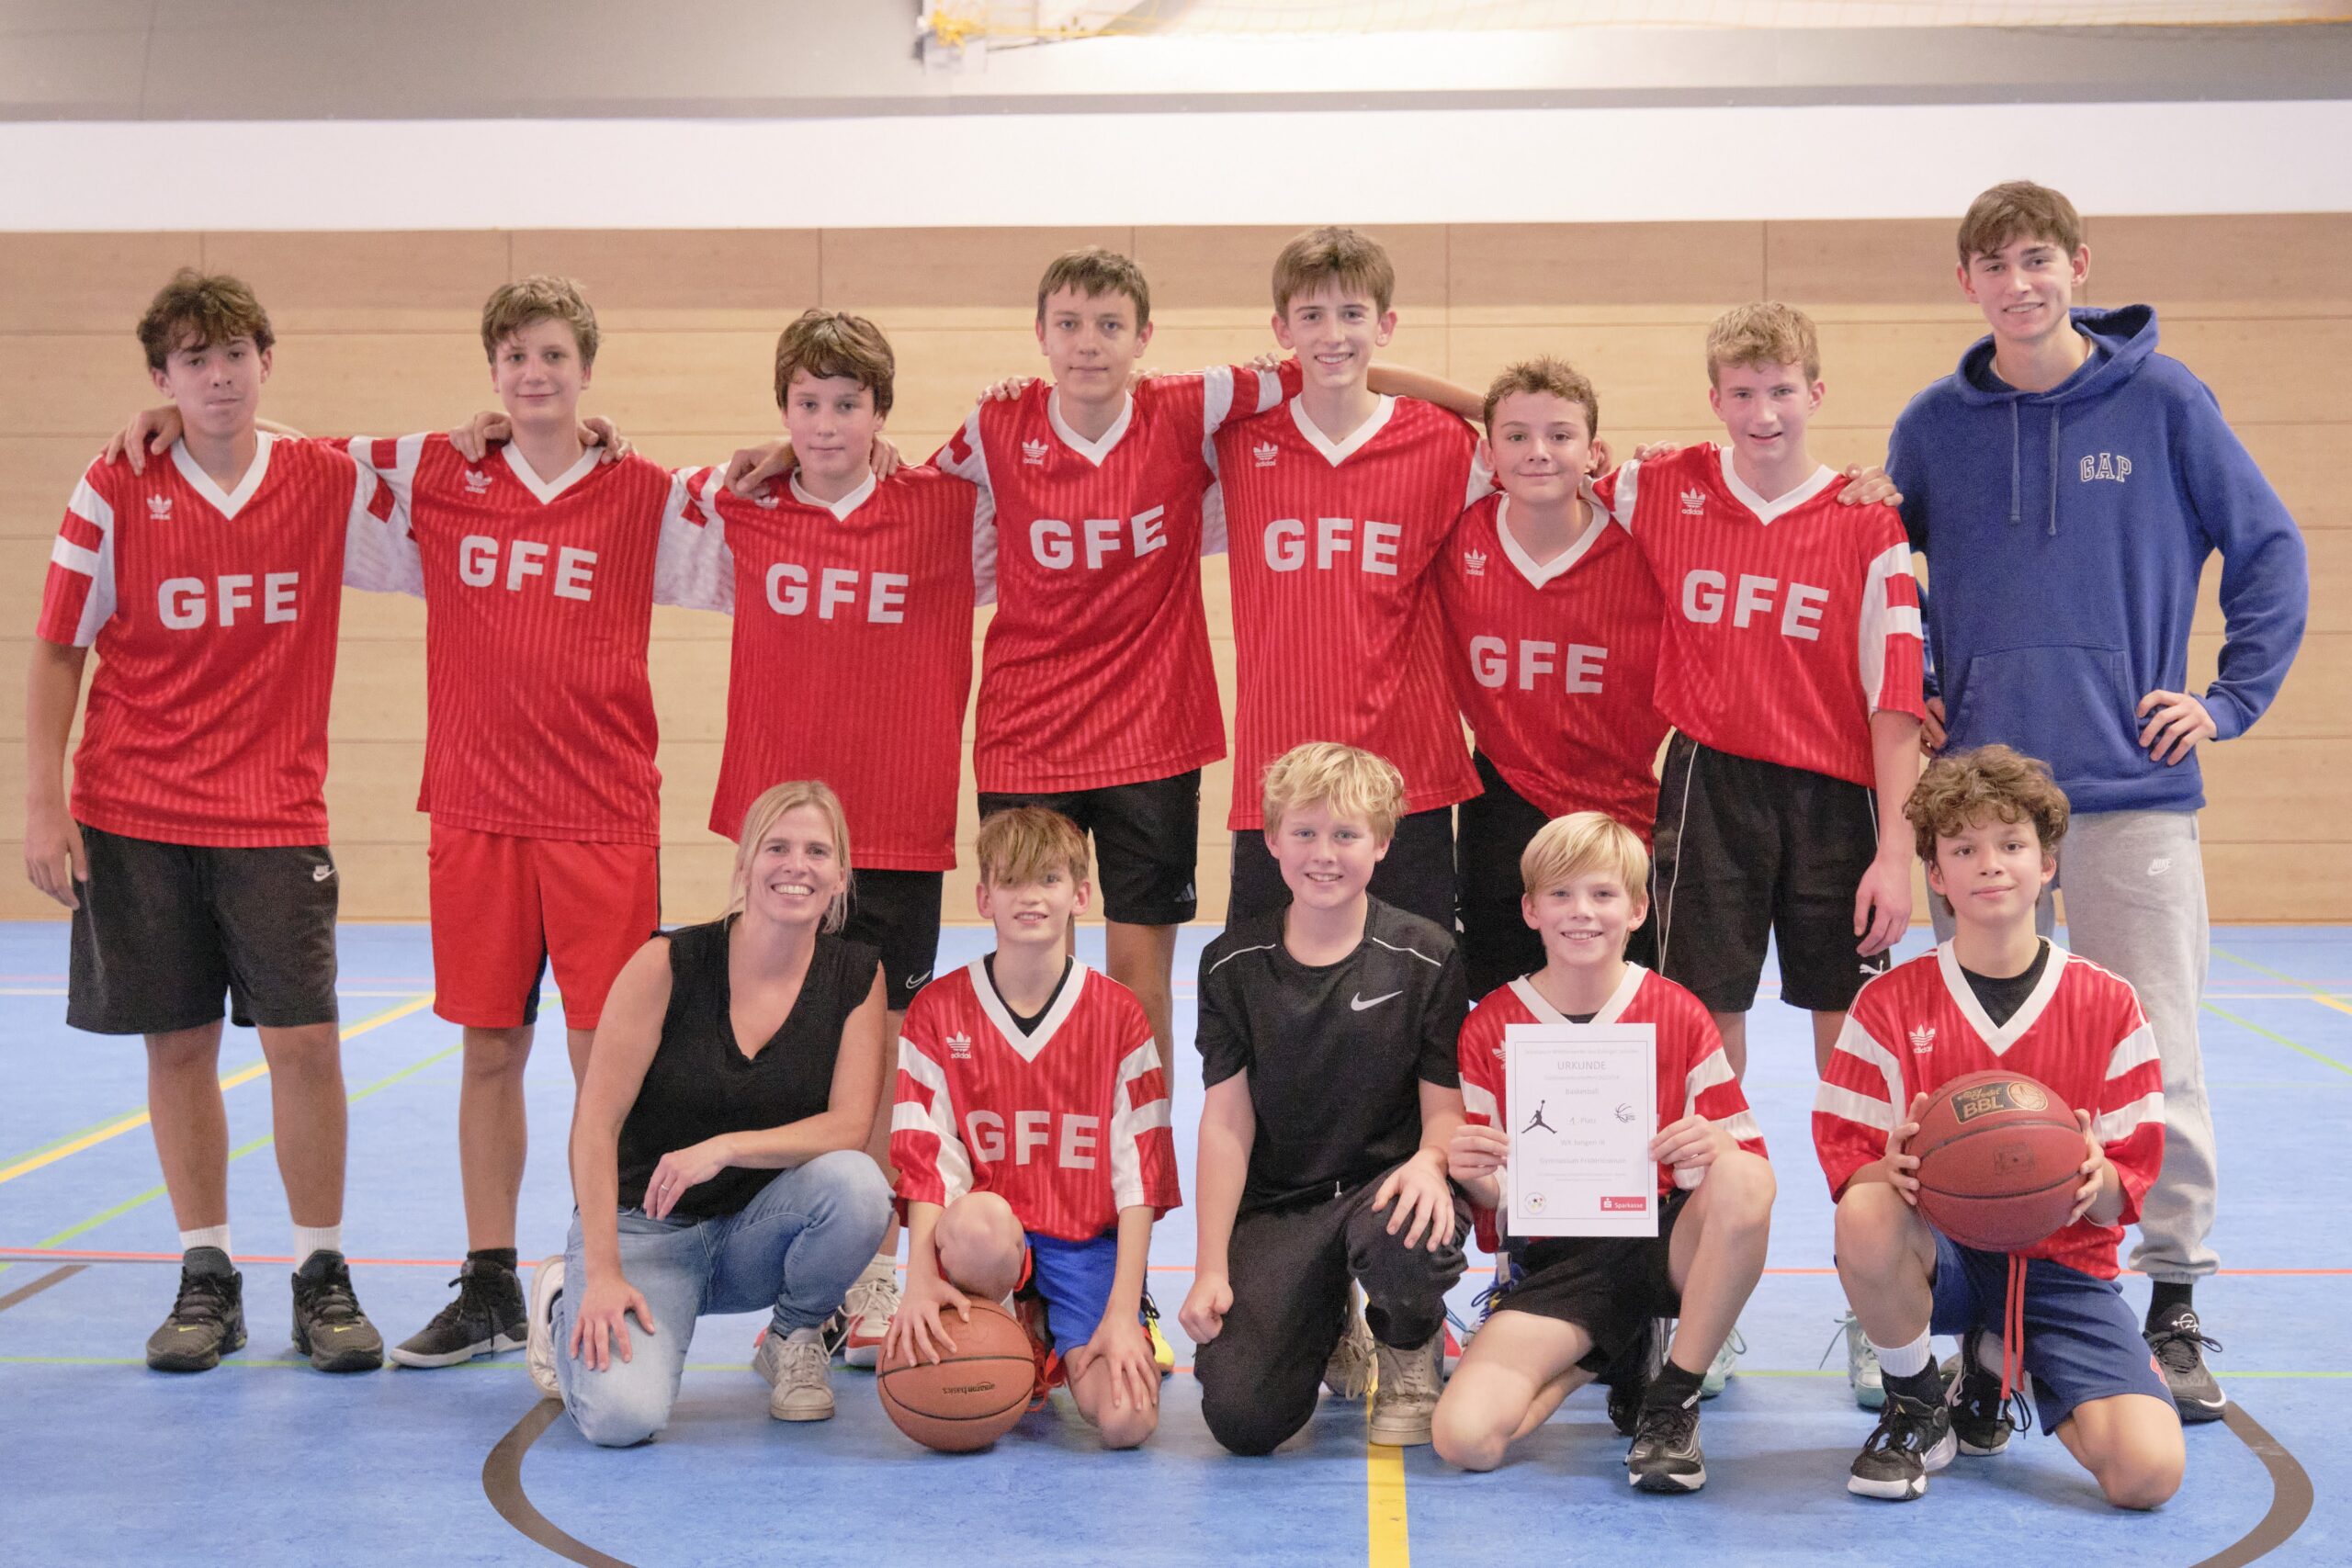 You are currently viewing Veni, vidi, vici – Unsere GFE Basketballer sind Kreissieger! 